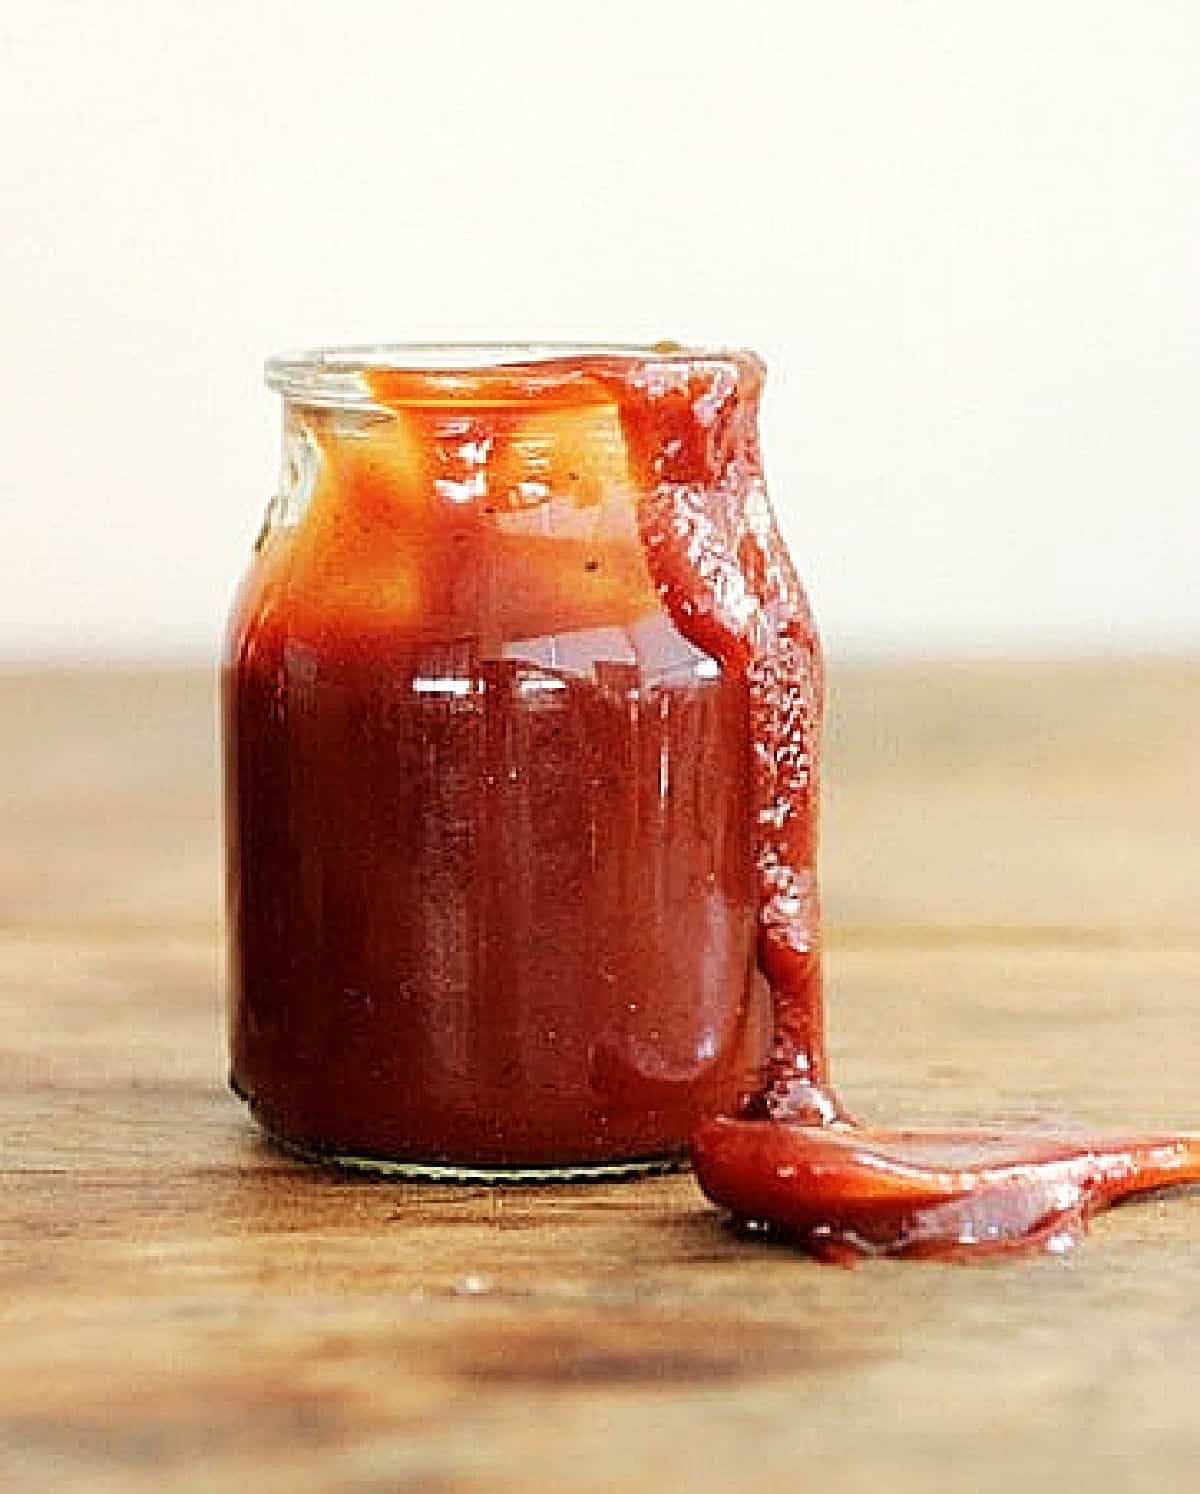 Jar with dripping red barbecue sauce on a wooden surface.